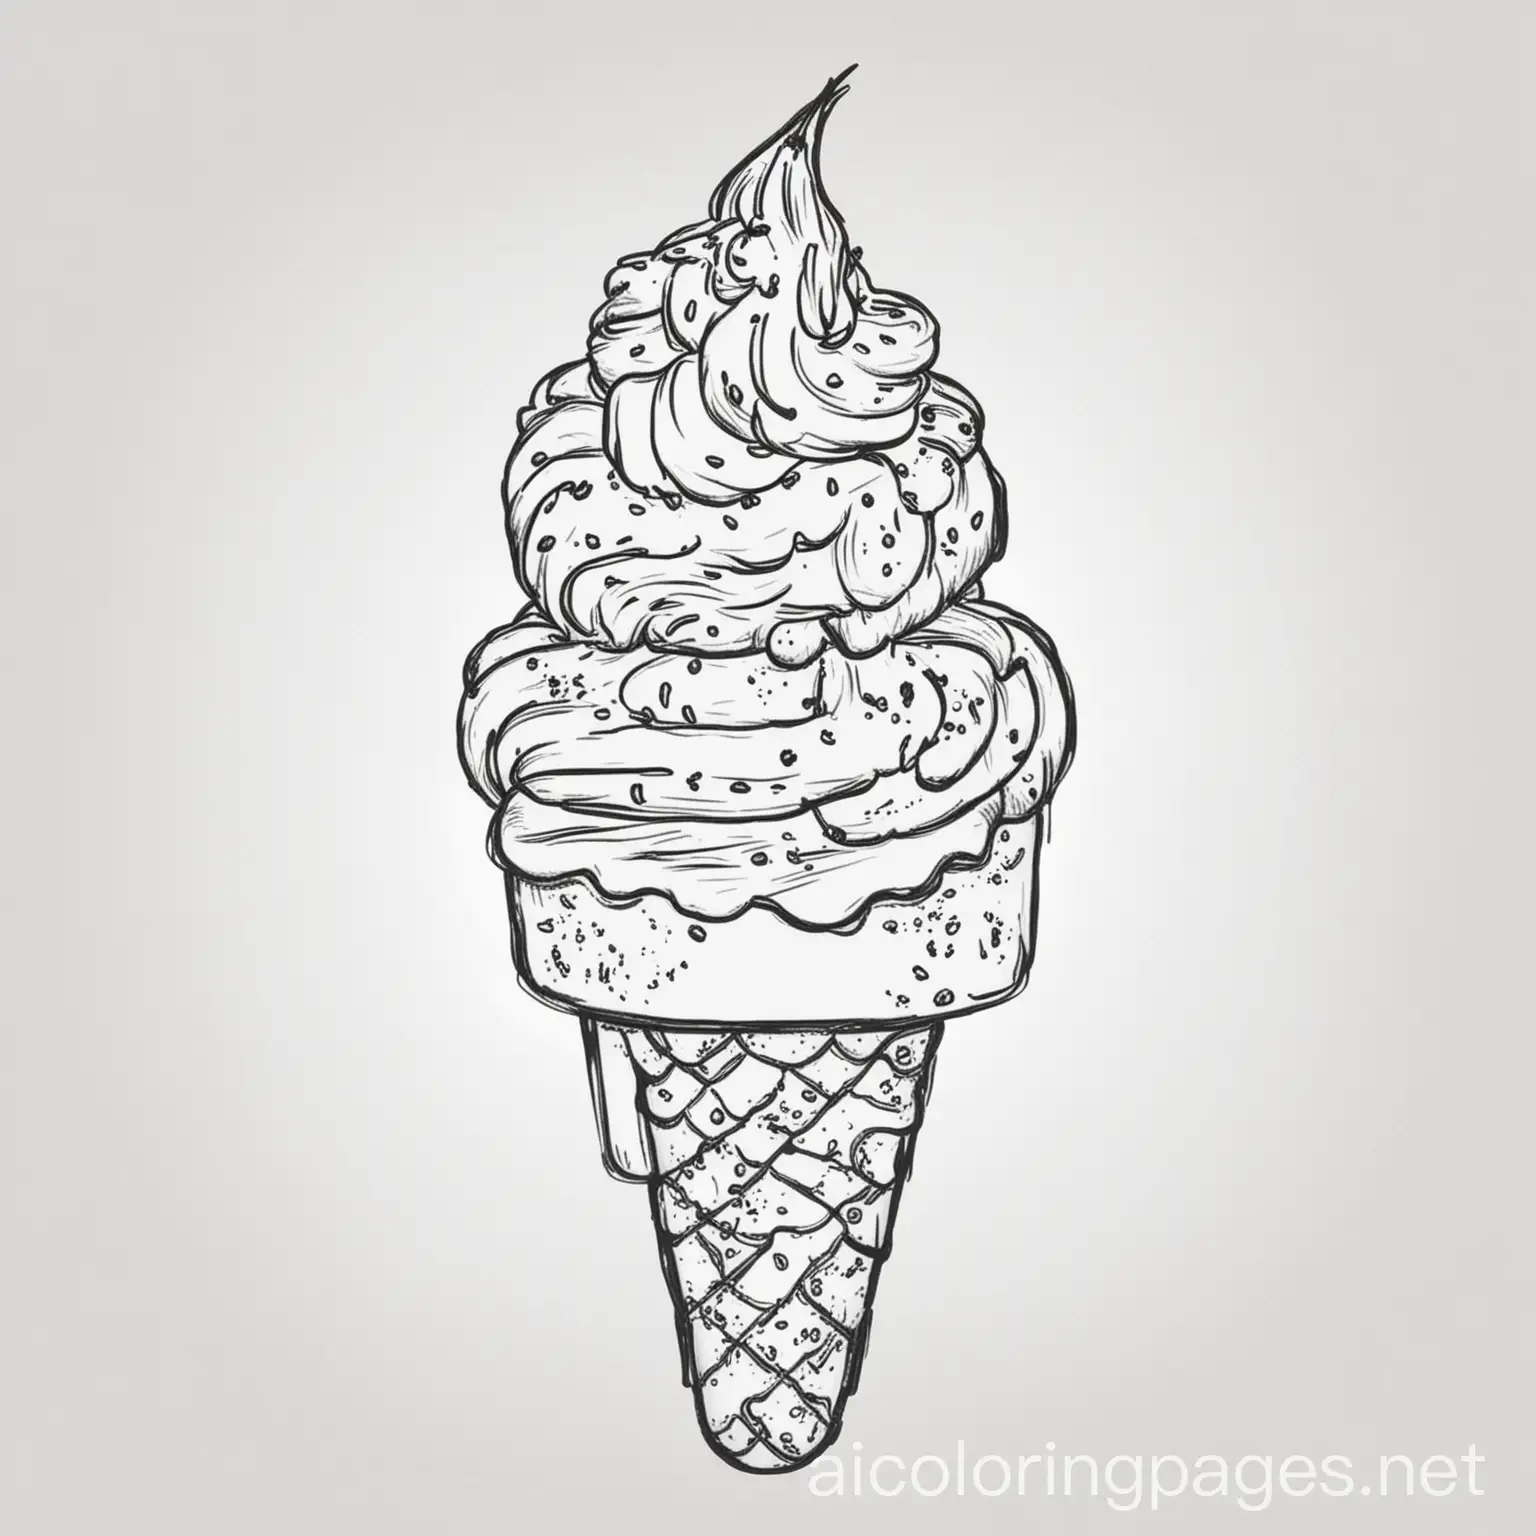 ice cream , Coloring Page, black and white, line art, white background, Simplicity, Ample White Space. The background of the coloring page is plain white to make it easy for young children to color within the lines. The outlines of all the subjects are easy to distinguish, making it simple for kids to color without too much difficulty